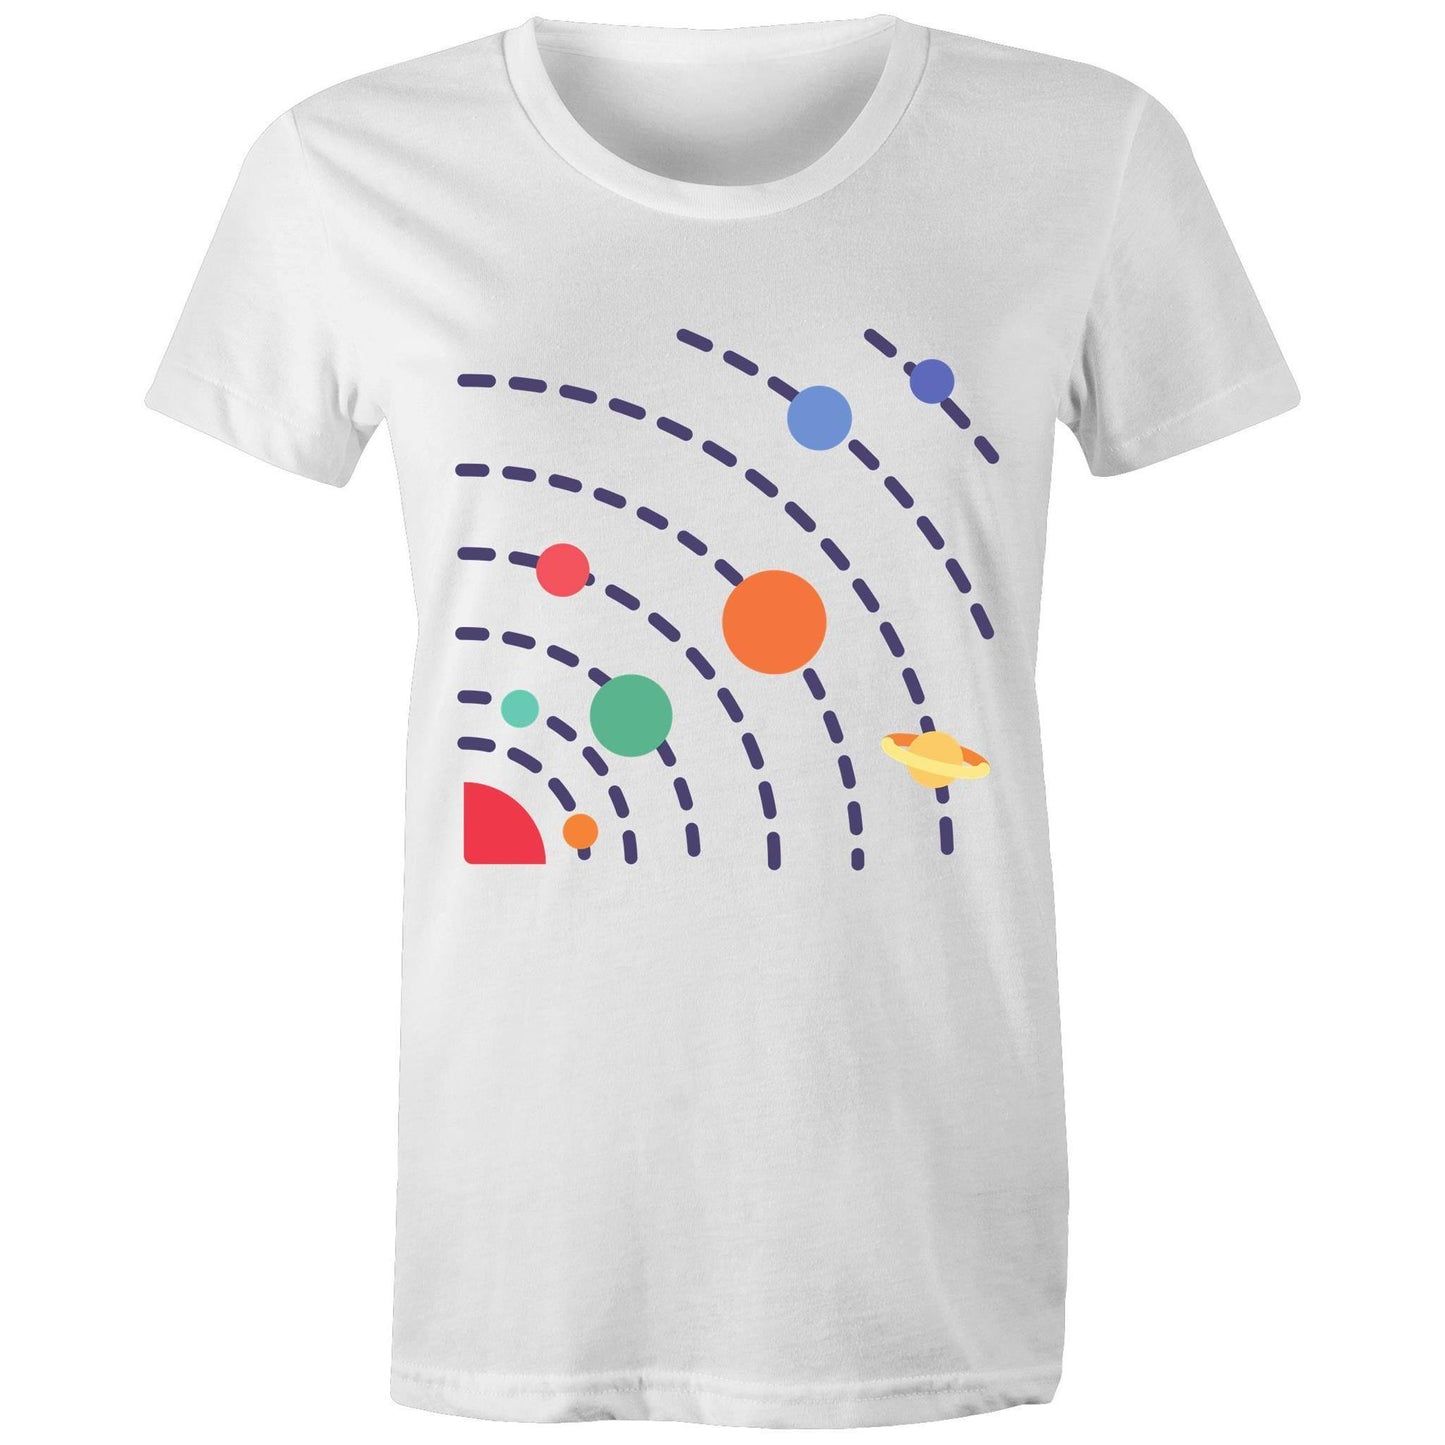 Solar System - Women's T-shirt White Womens T-shirt Science Space Womens